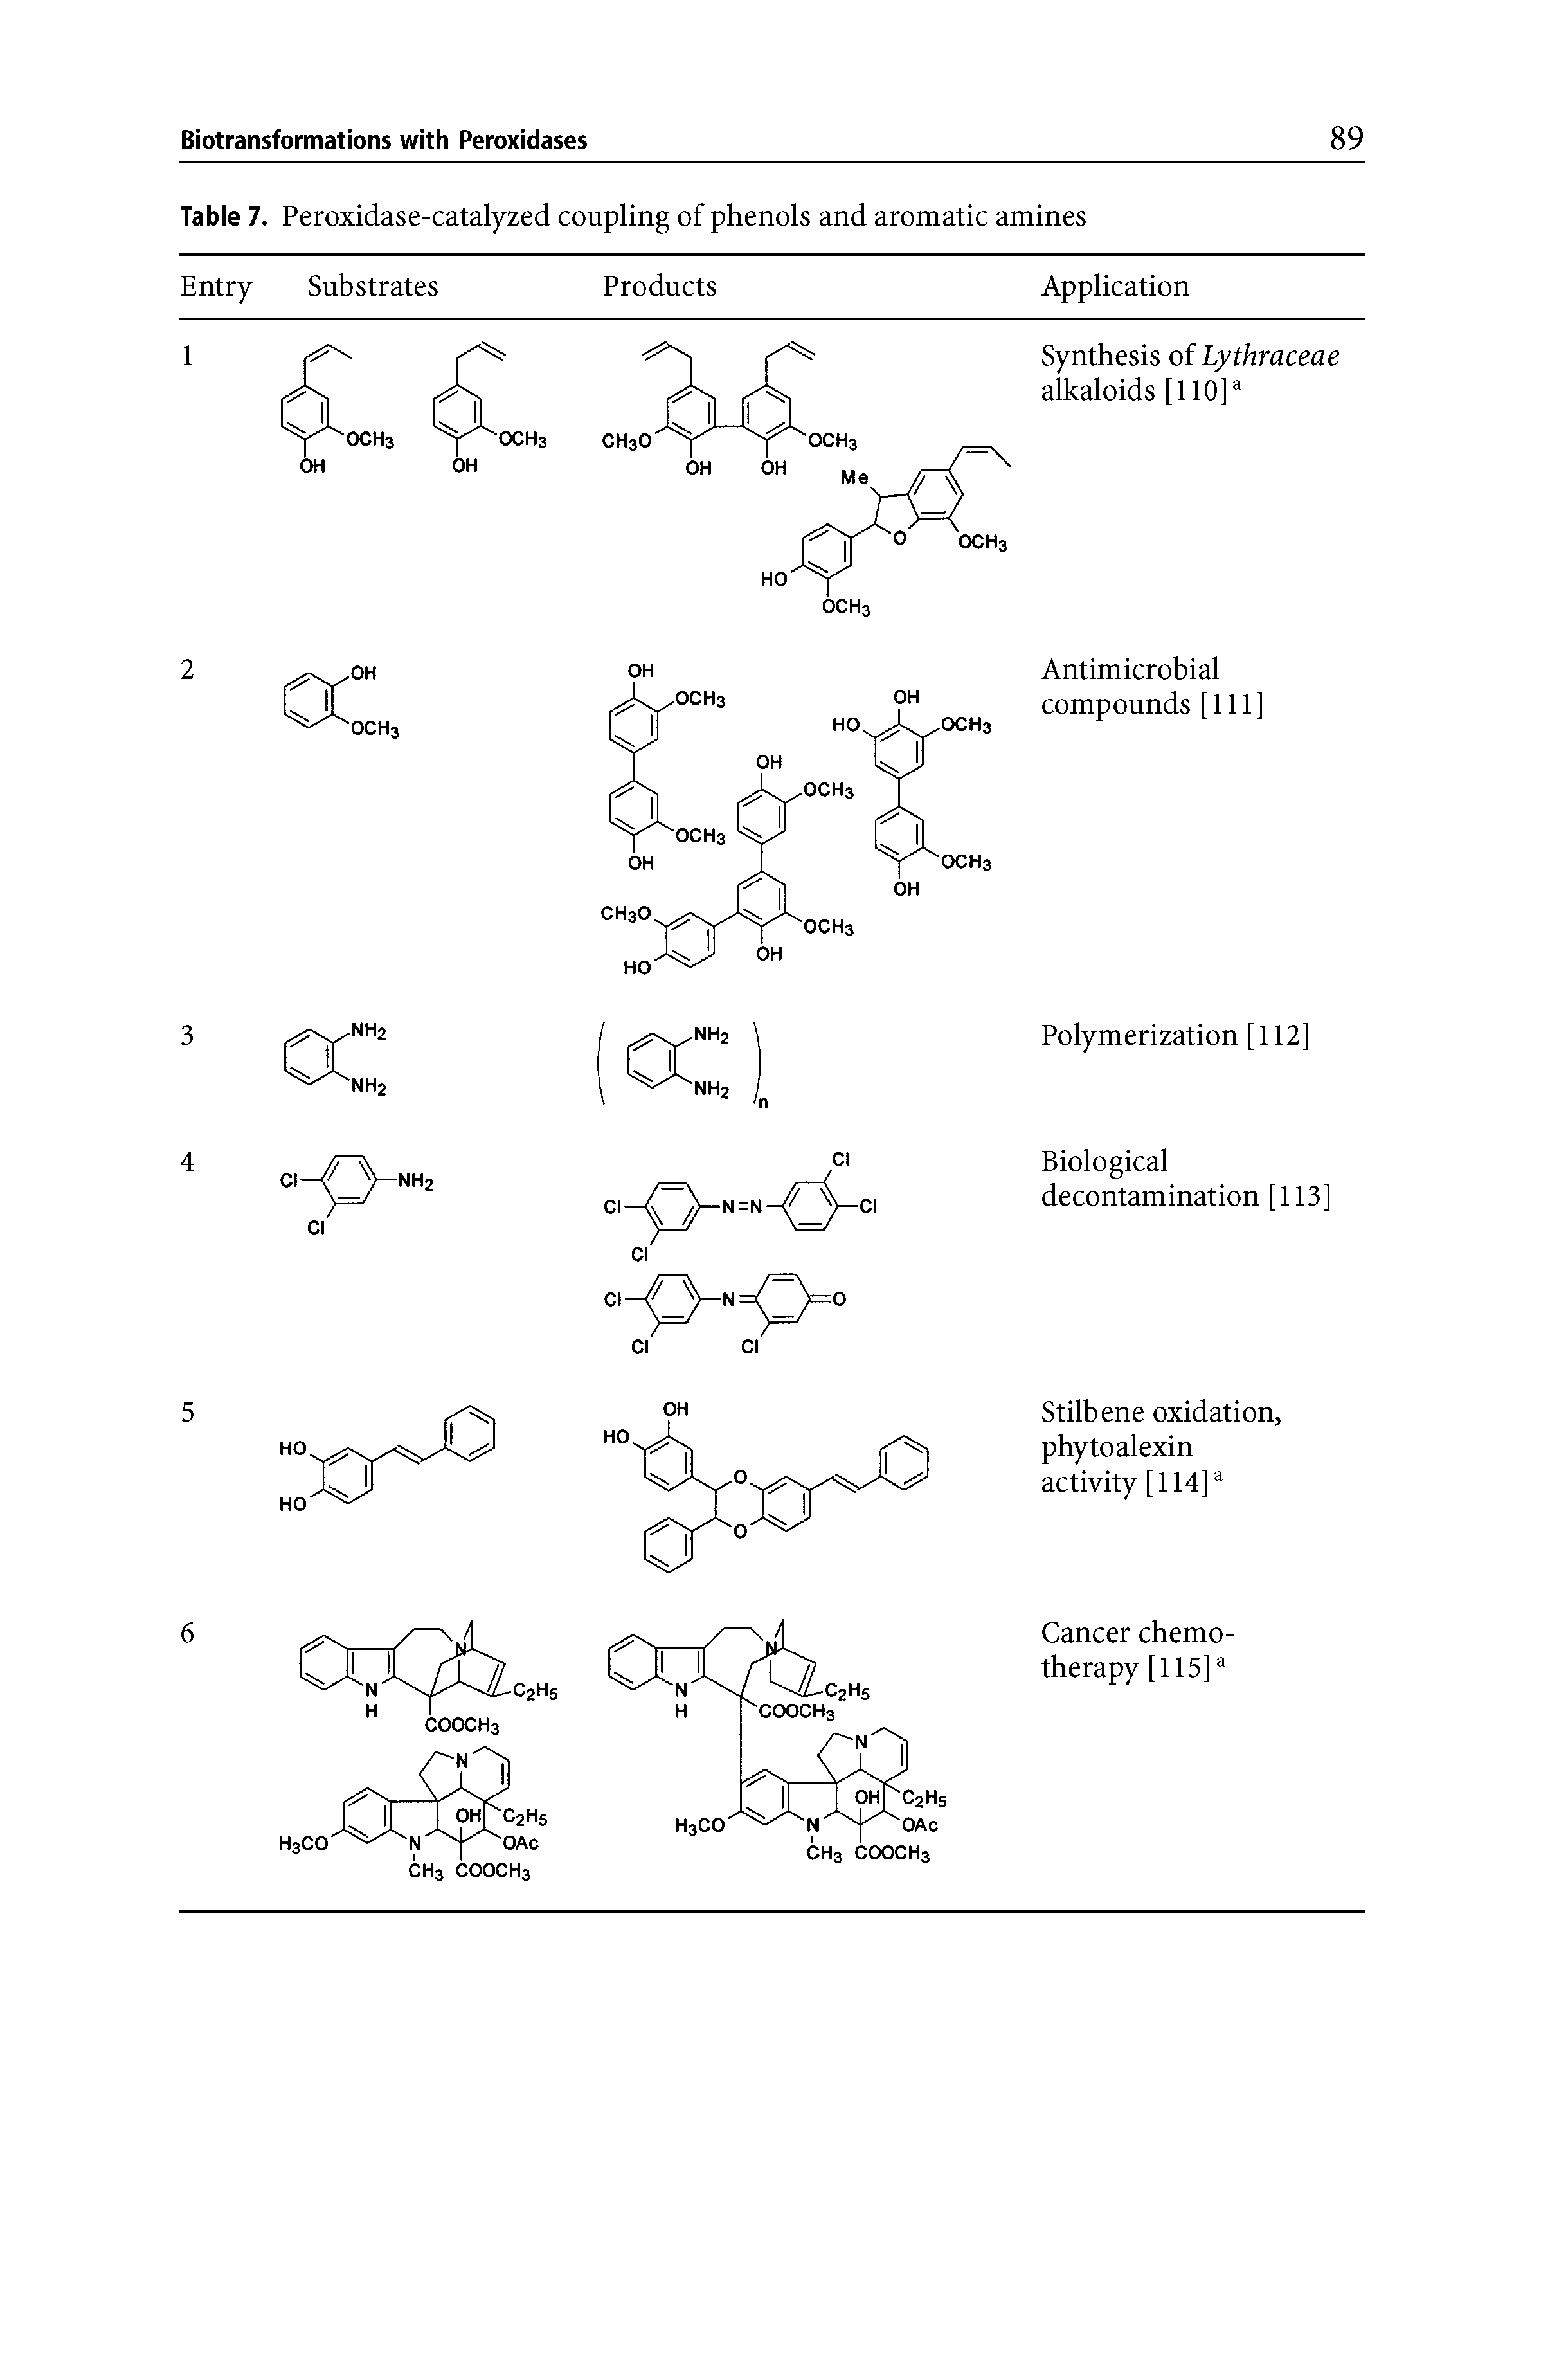 Table 7. Peroxidase-catalyzed coupling of phenols and aromatic amines...